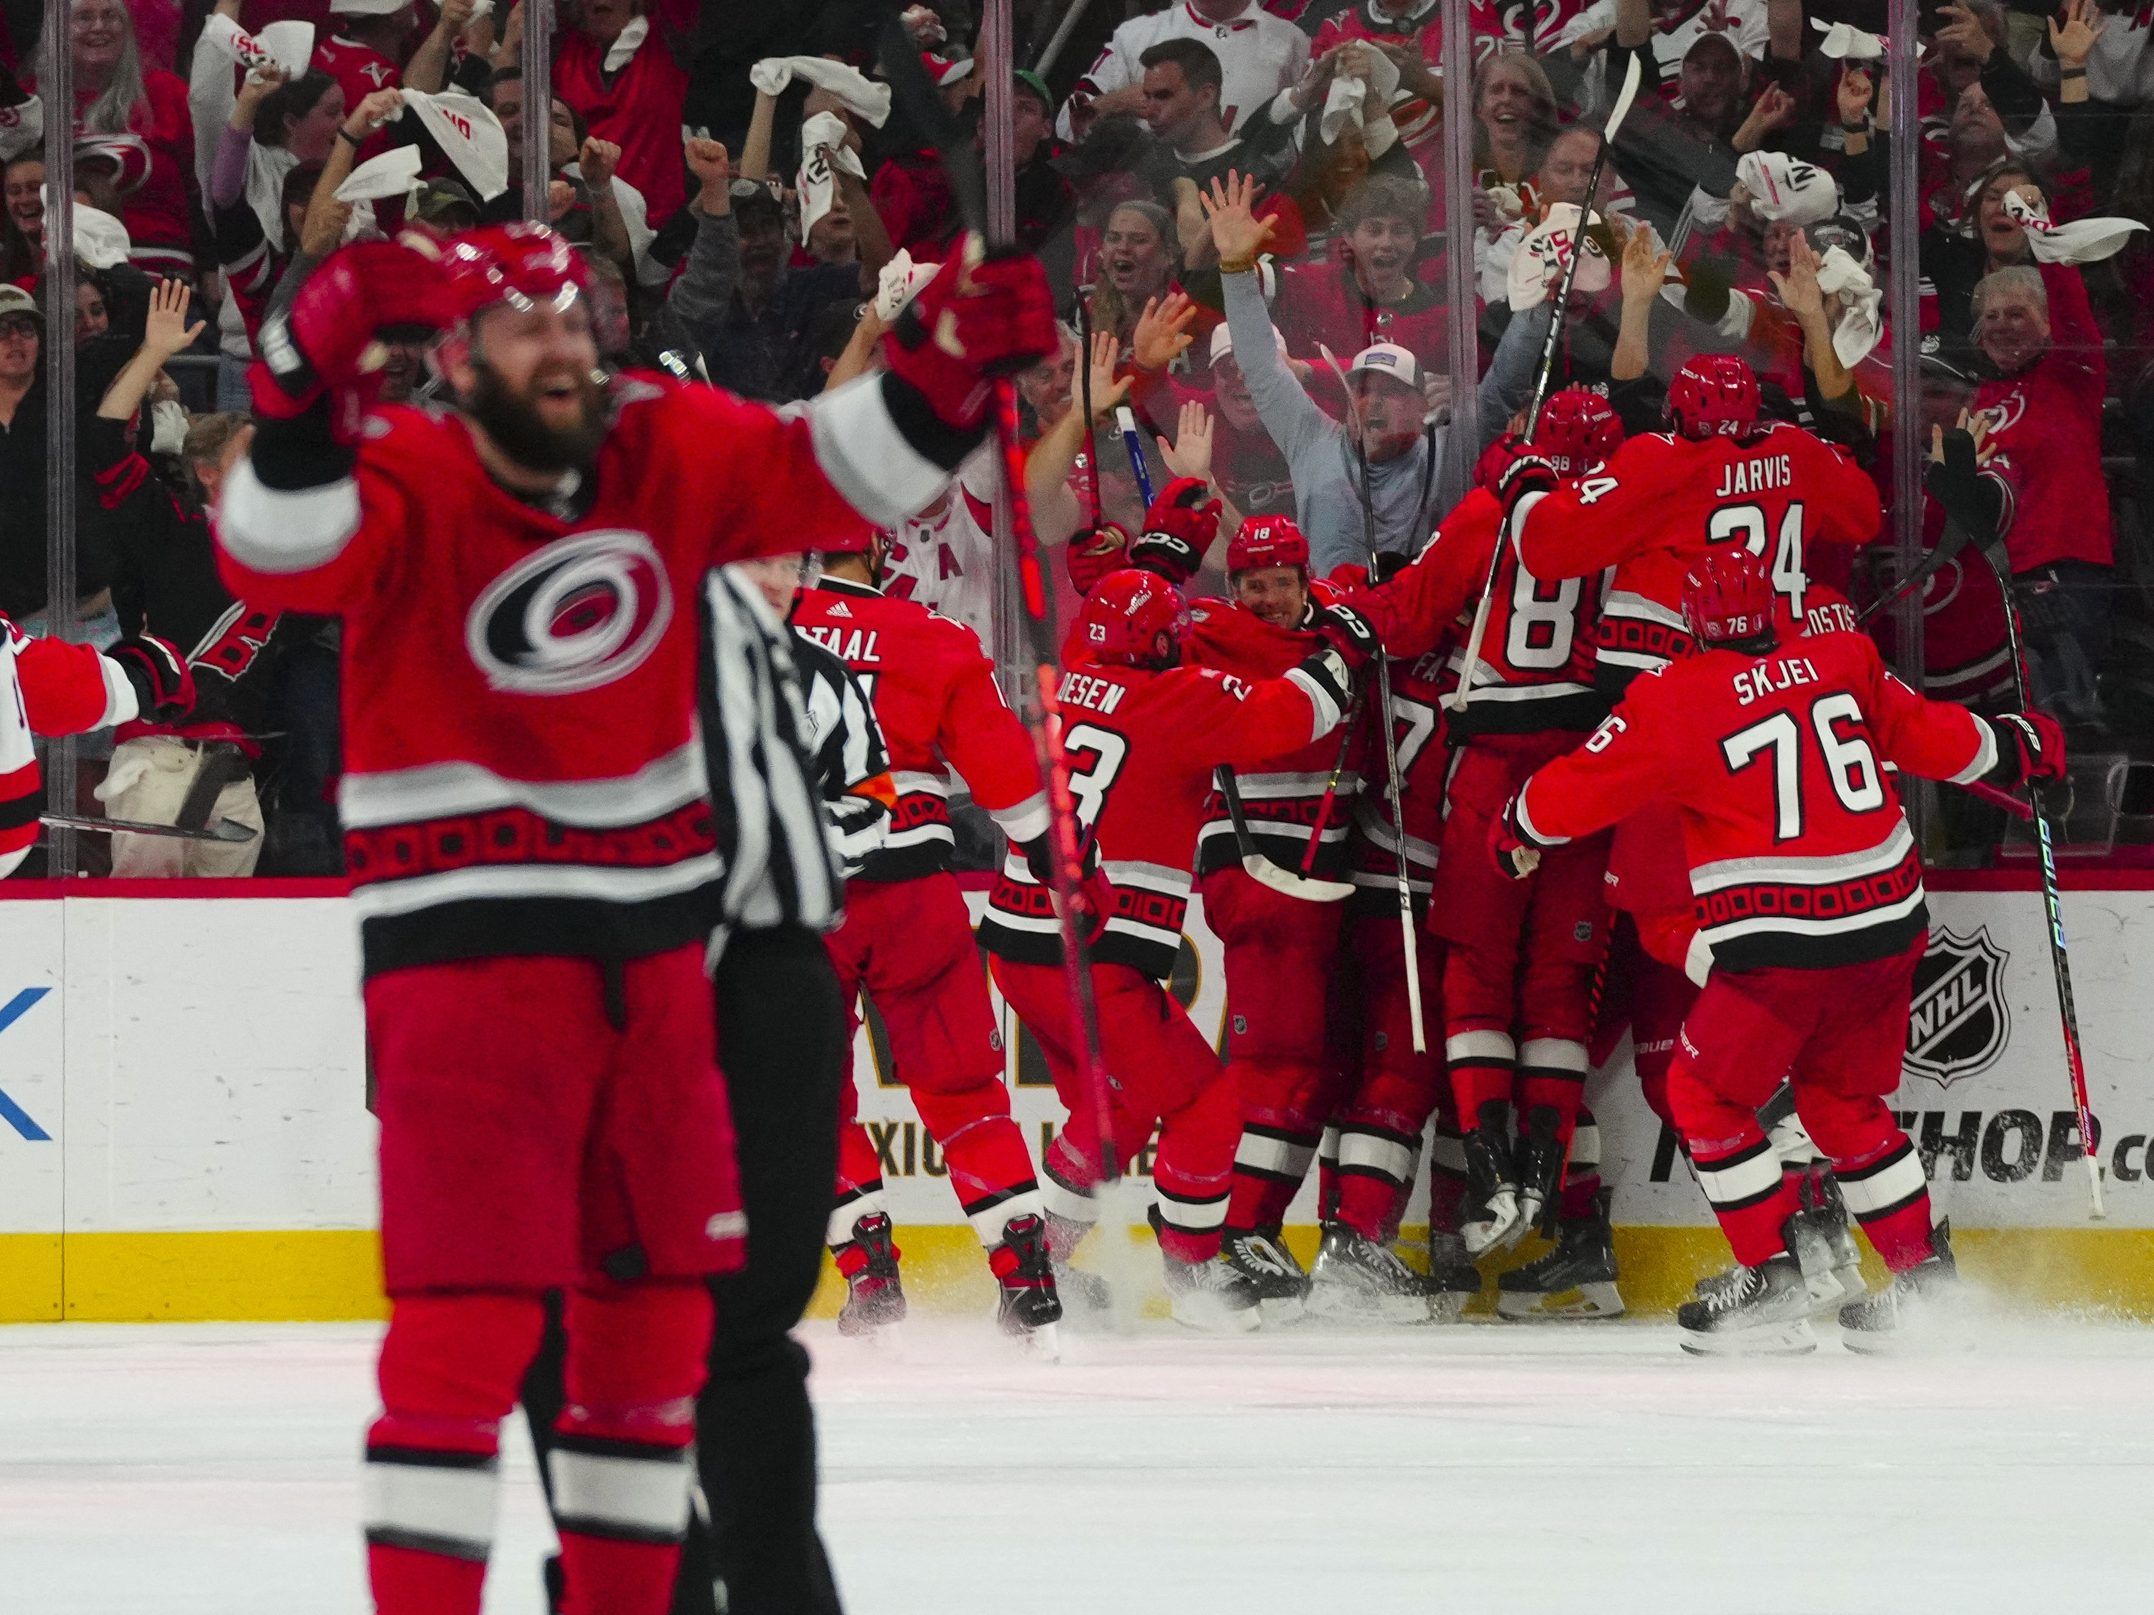 Carolina Hurricanes Will Don the Black For the Playoffs Once Again